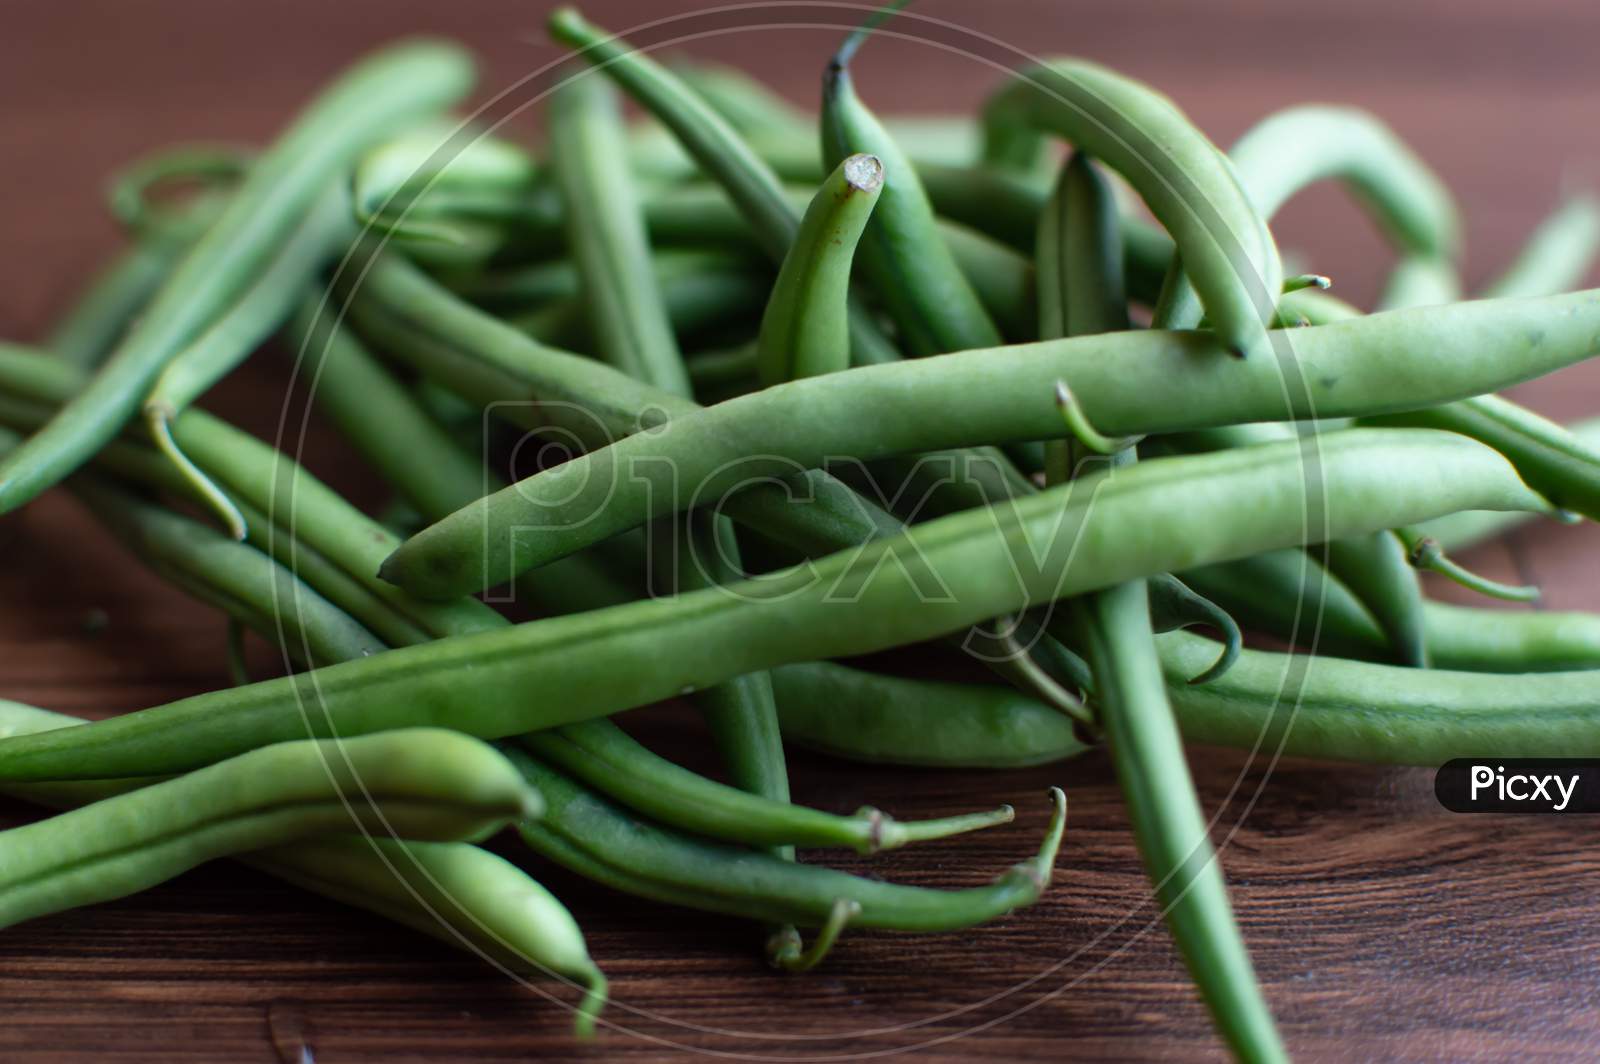 Bunch of green beans on a brown wooden floor